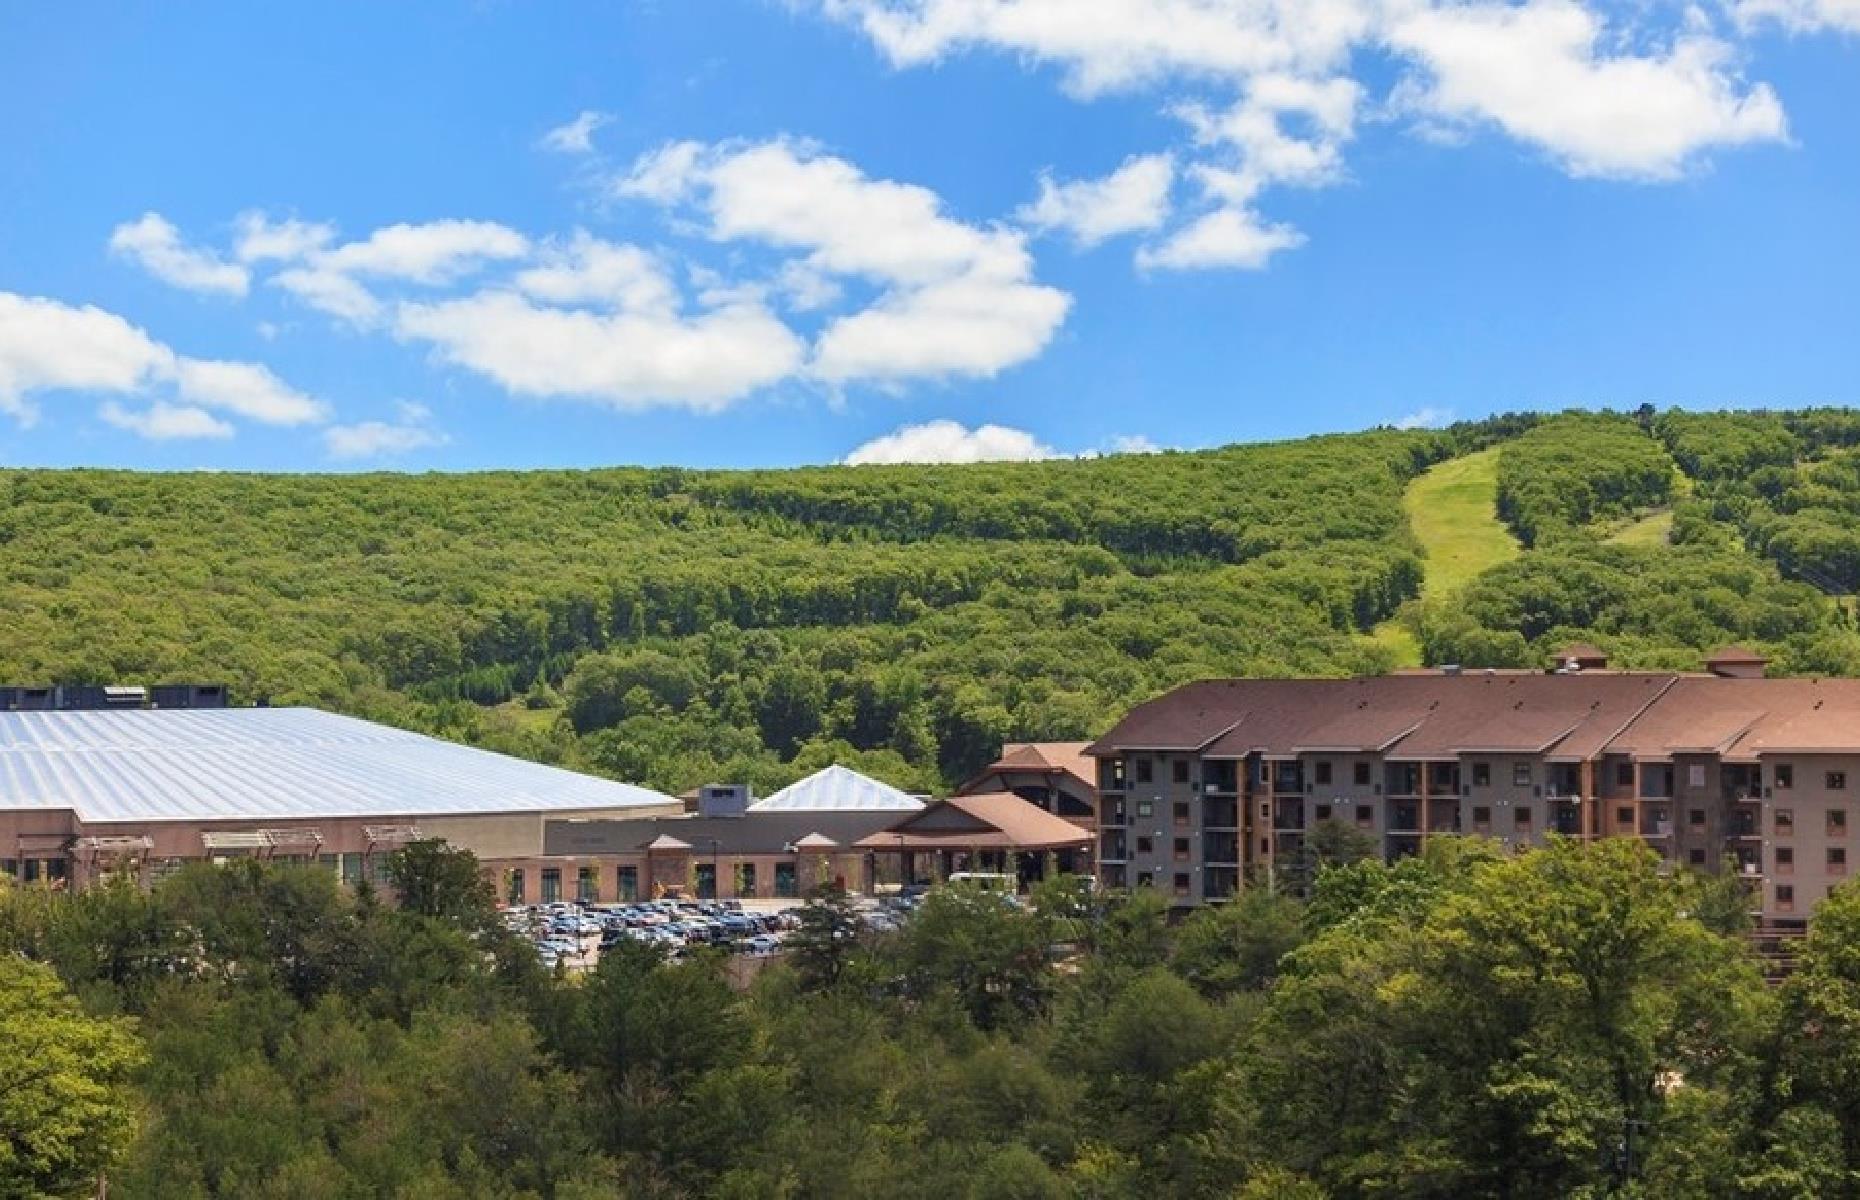 <p><a href="https://www.camelbackresort.com/">This resort</a> in the Pocono Mountains is dedicated to family fun, with lots to keep adventurers of all ages busy any time of the year. Camelback Mountain is a winter wonderland for skiers, snowboarders and tubers, but you don't have to ski to enjoy the resort. It also has adjacent indoor and outdoor waterparks, a summertime mountain coaster and treetop adventure course, and family-friendly restaurants.</p>